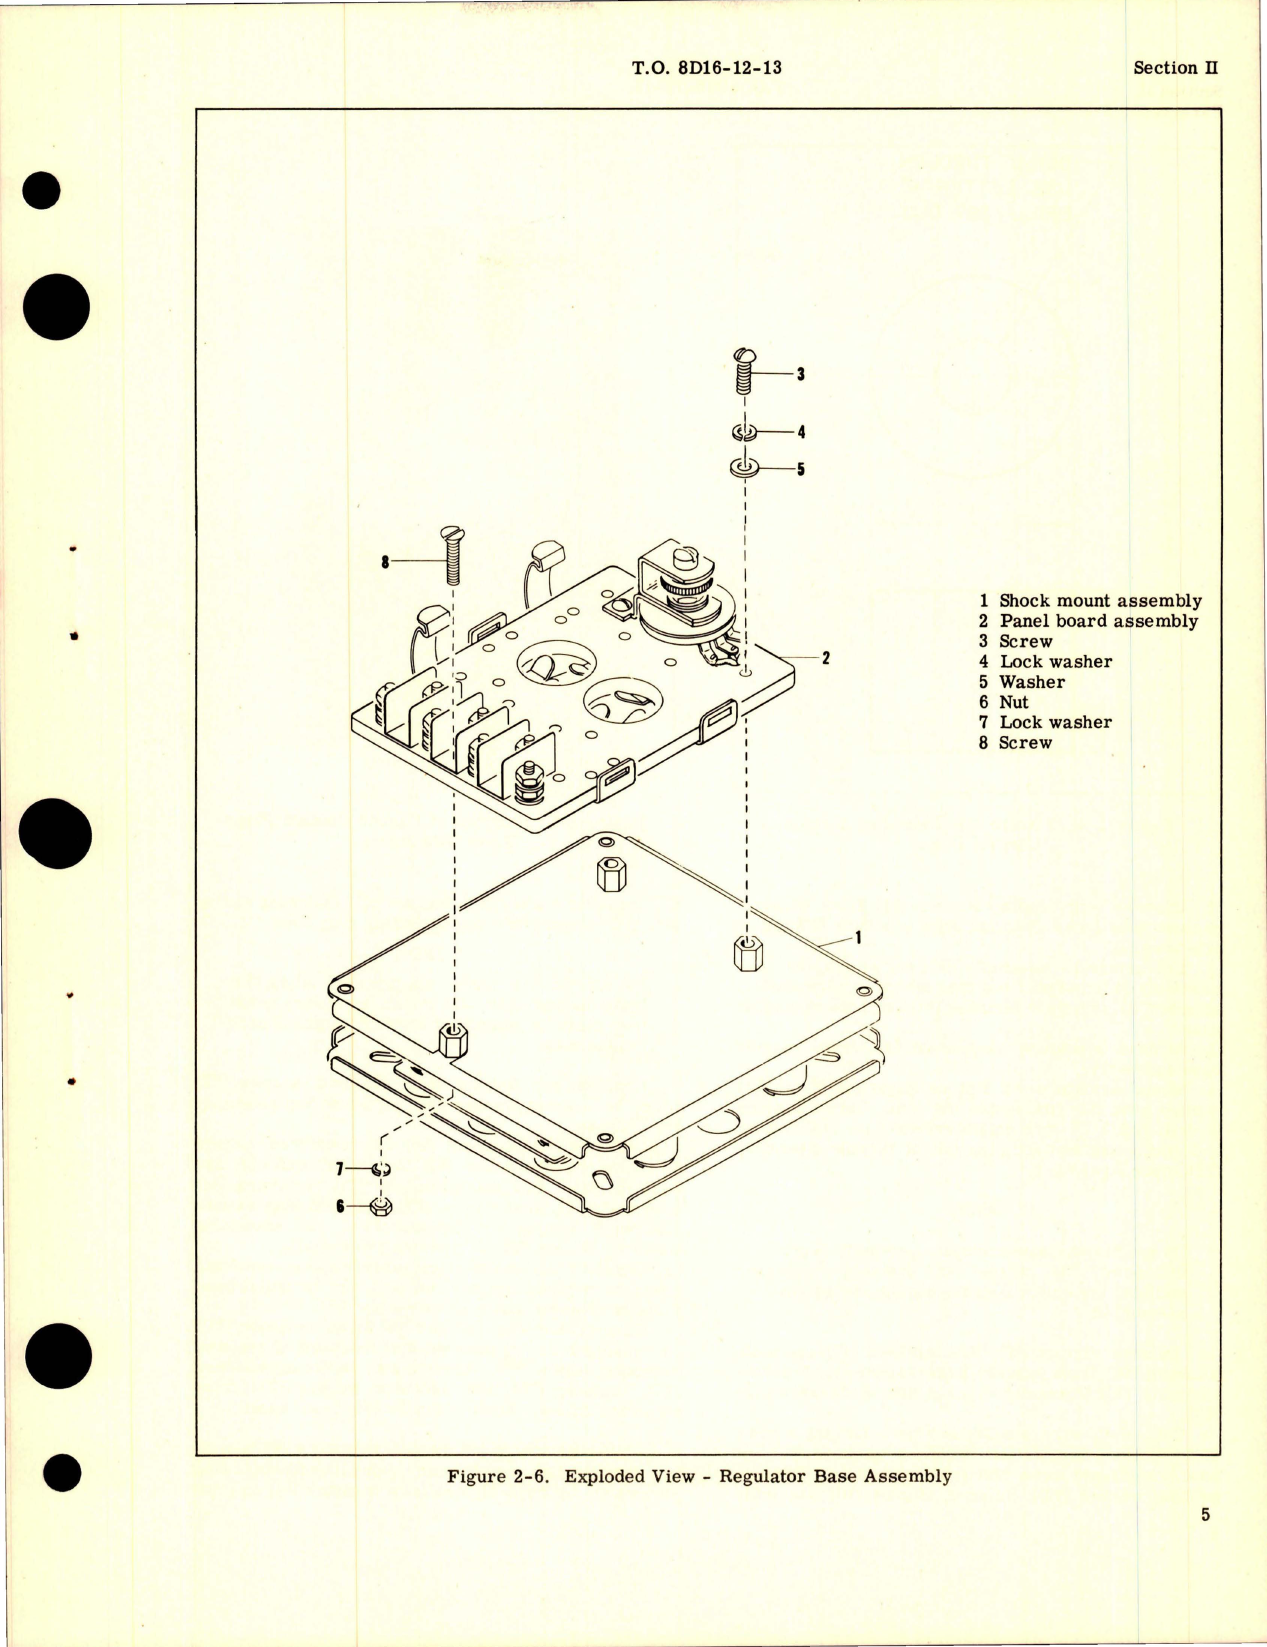 Sample page 9 from AirCorps Library document: Overhaul Instructions for D-C Carbon Pile Voltage Regulator 